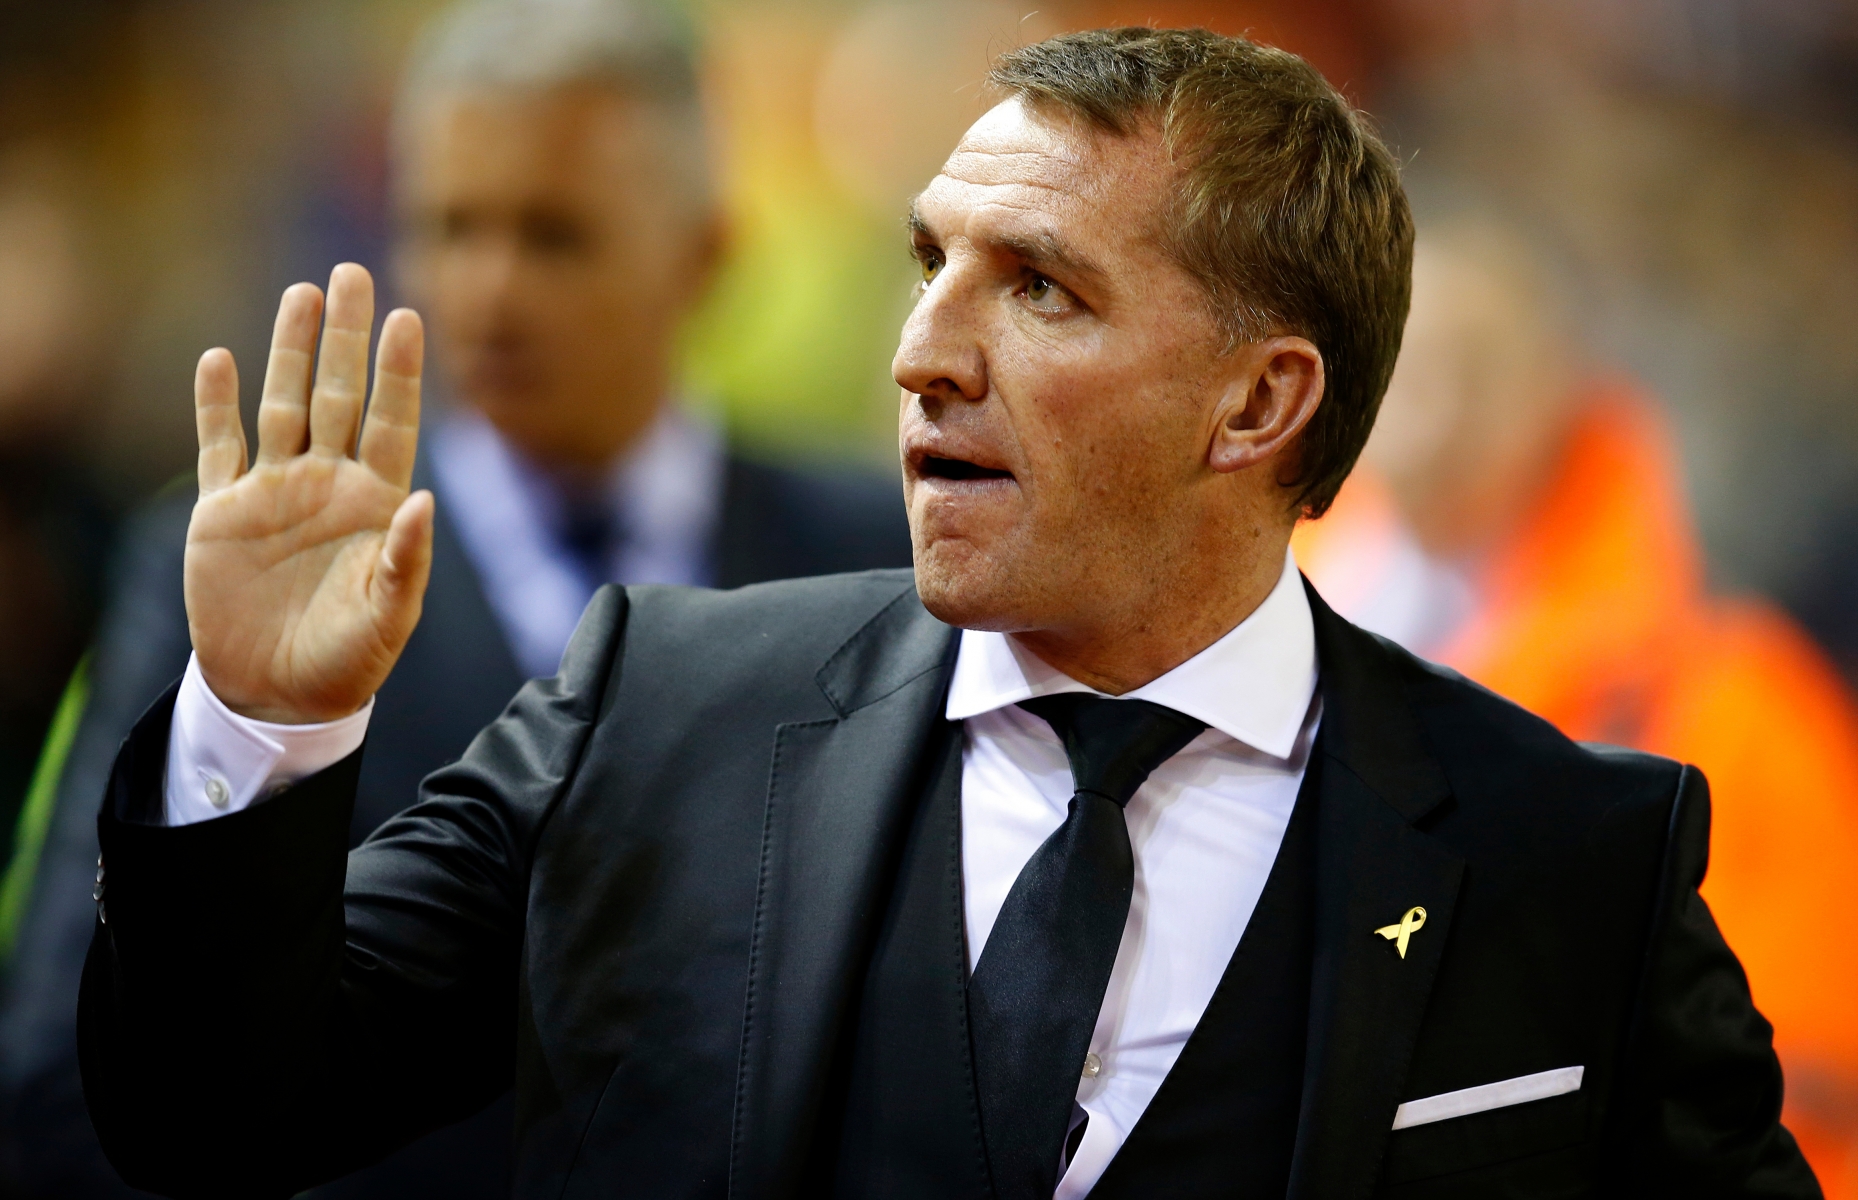 Liverpool manager Brendan Rodgers acknowledges the fans during the Capital One Cup, third round match at Anfield, Liverpool. (KEYSTONE/PRESS ASSOCIATION IMAGES/Peter Byrne)3 24221780